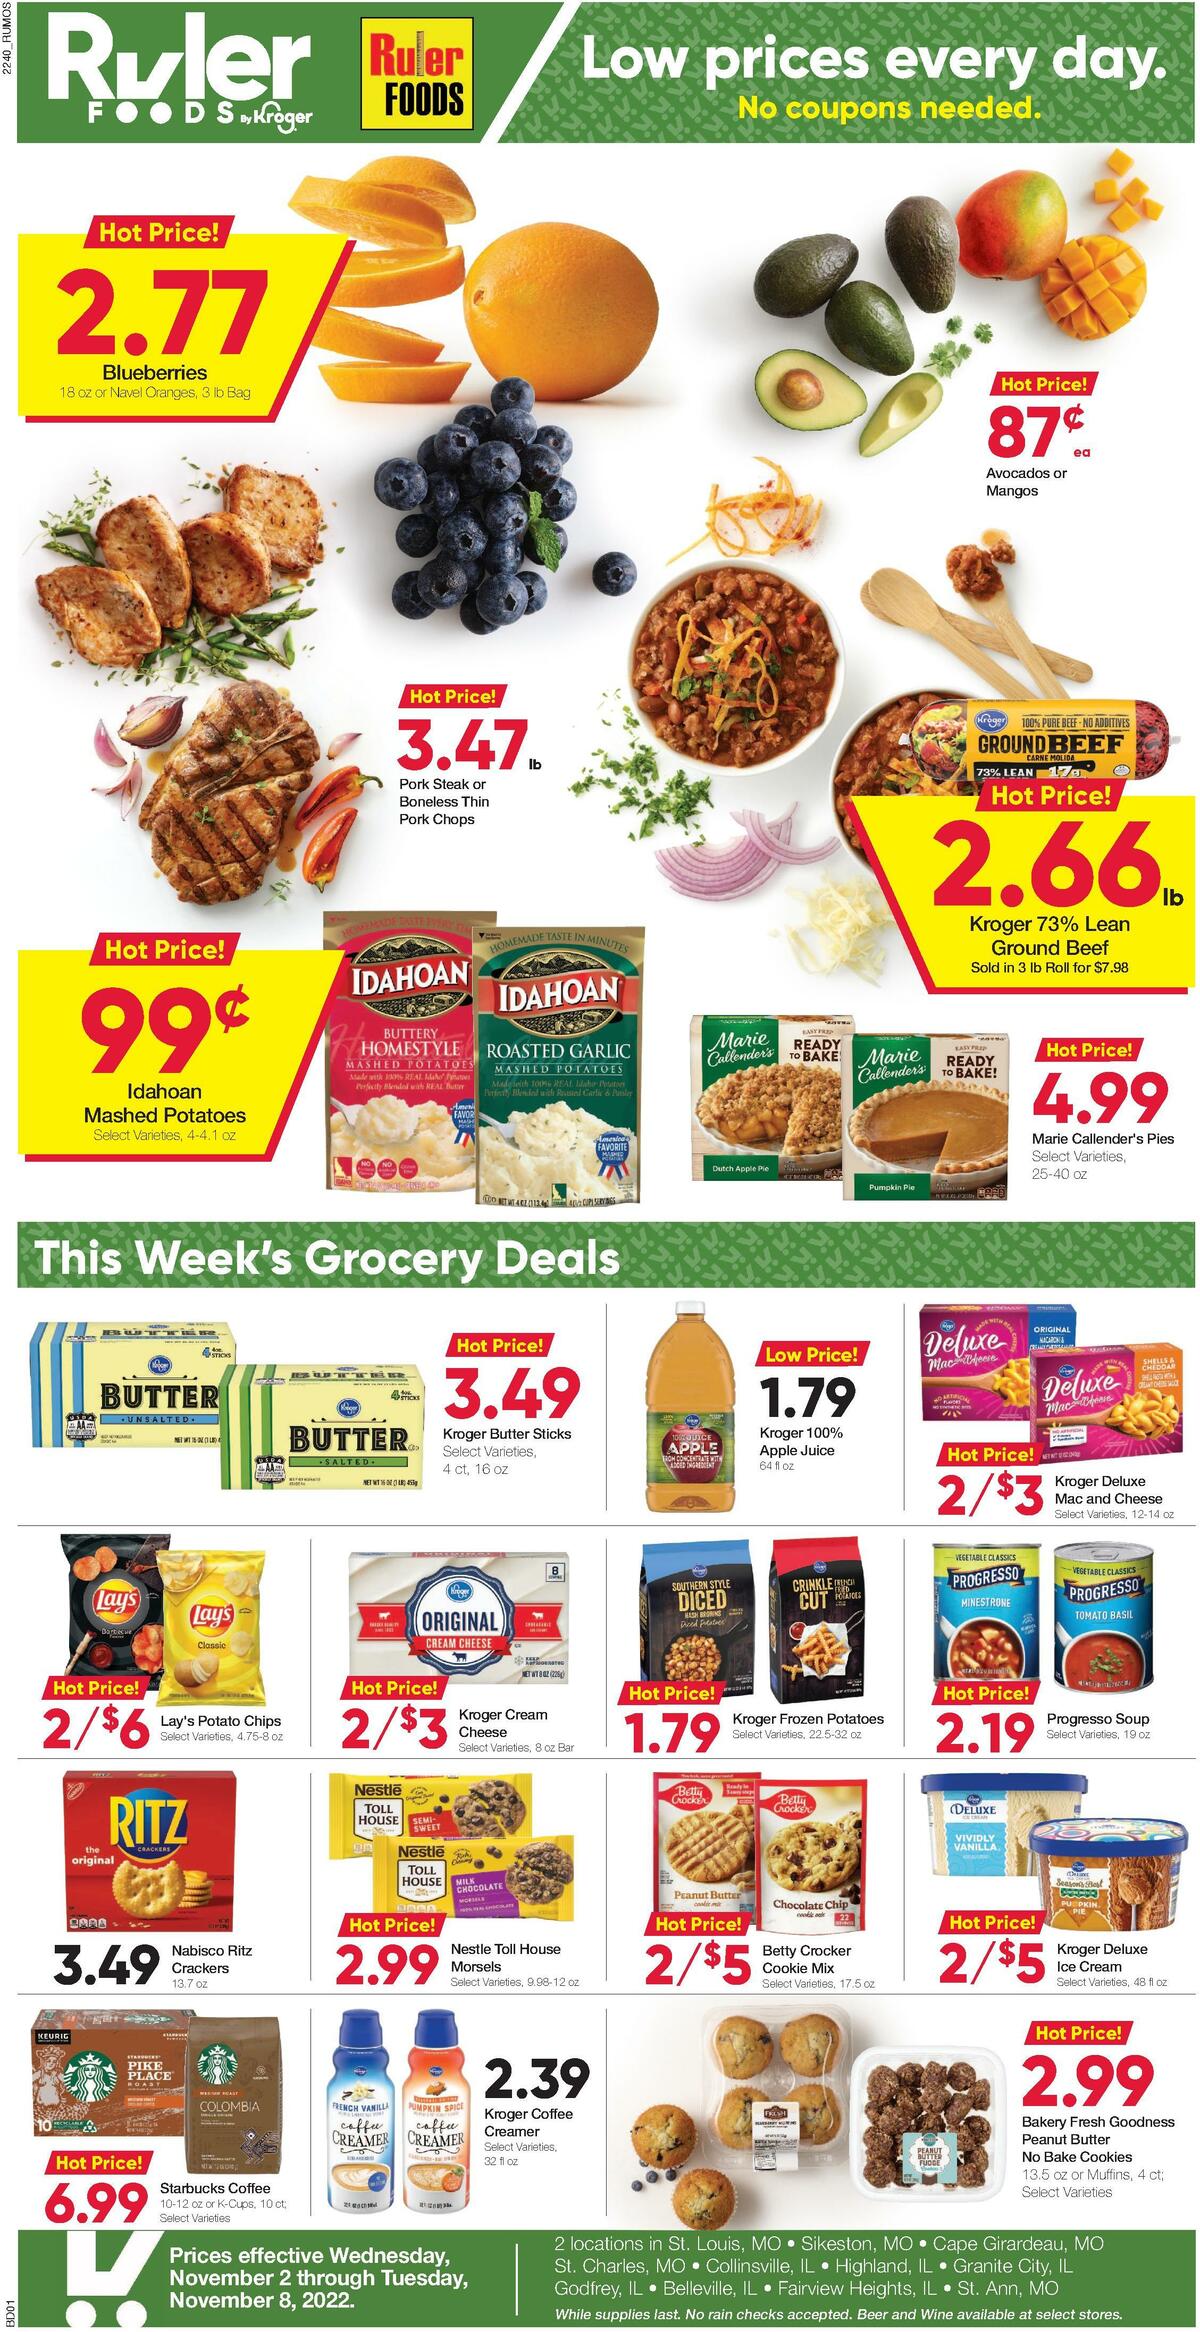 Ruler Foods Weekly Ad from November 2